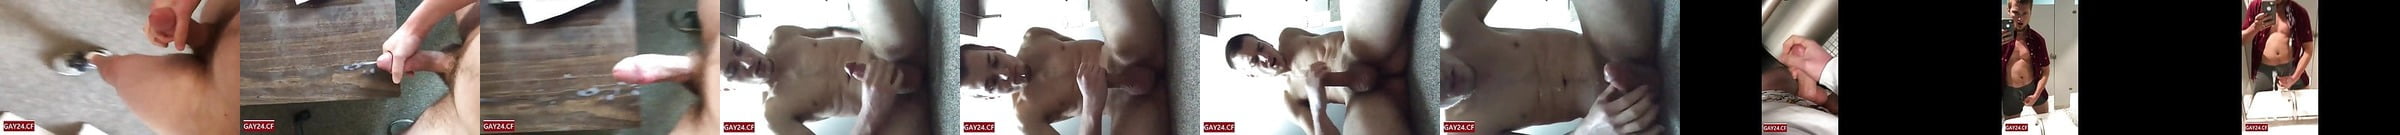 He Jerks Off In Front Of His Roommate Free Gay Porn Fe XHamster